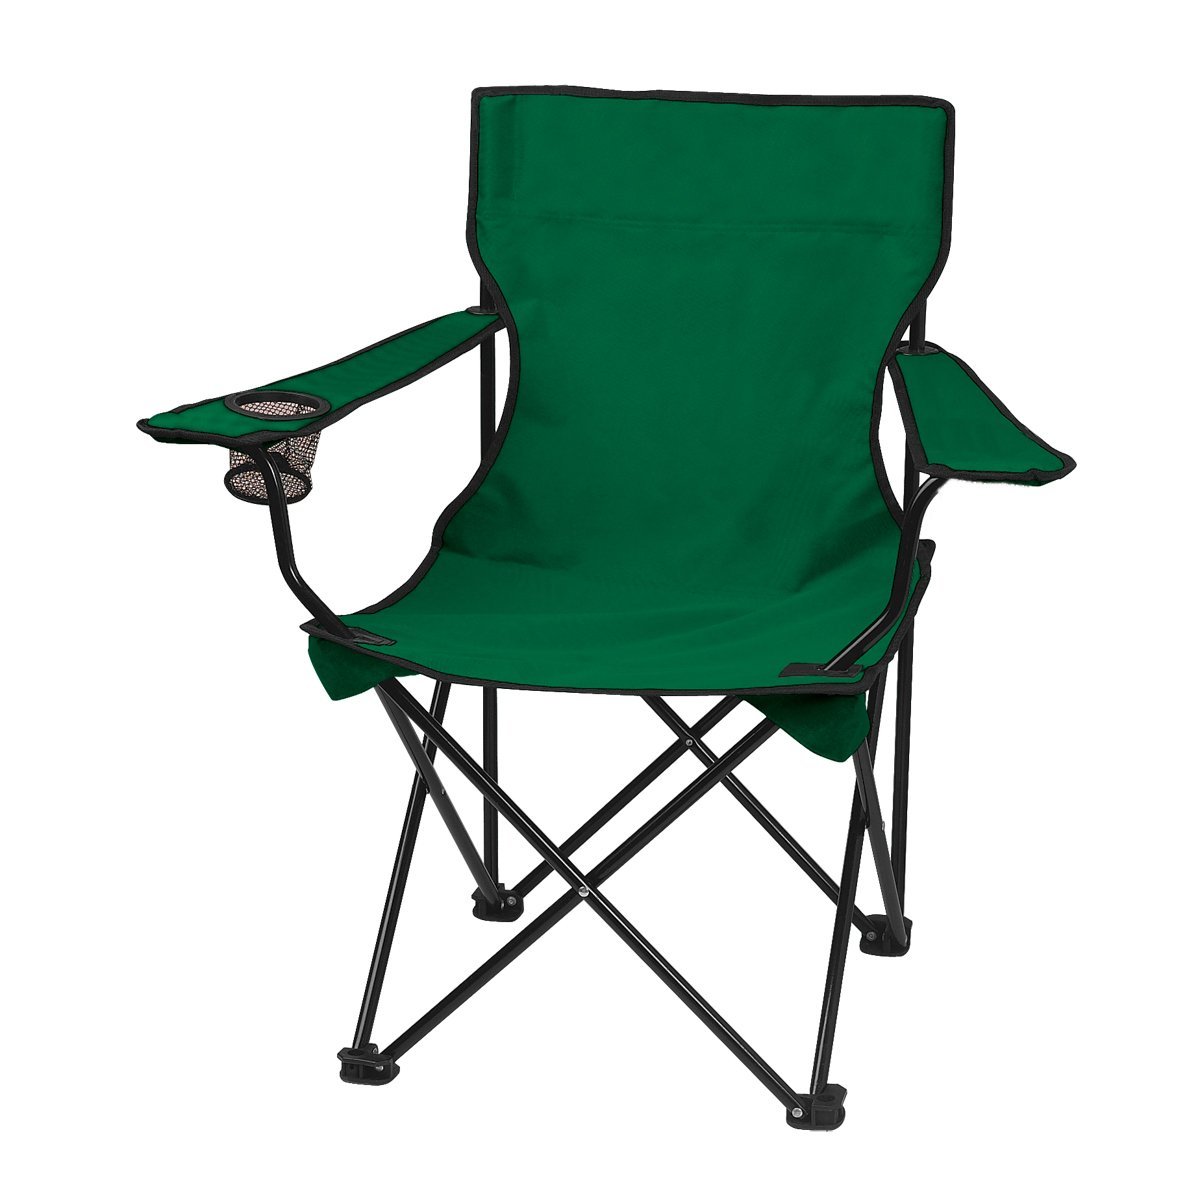 Portable Folding Camping Green Color Chair